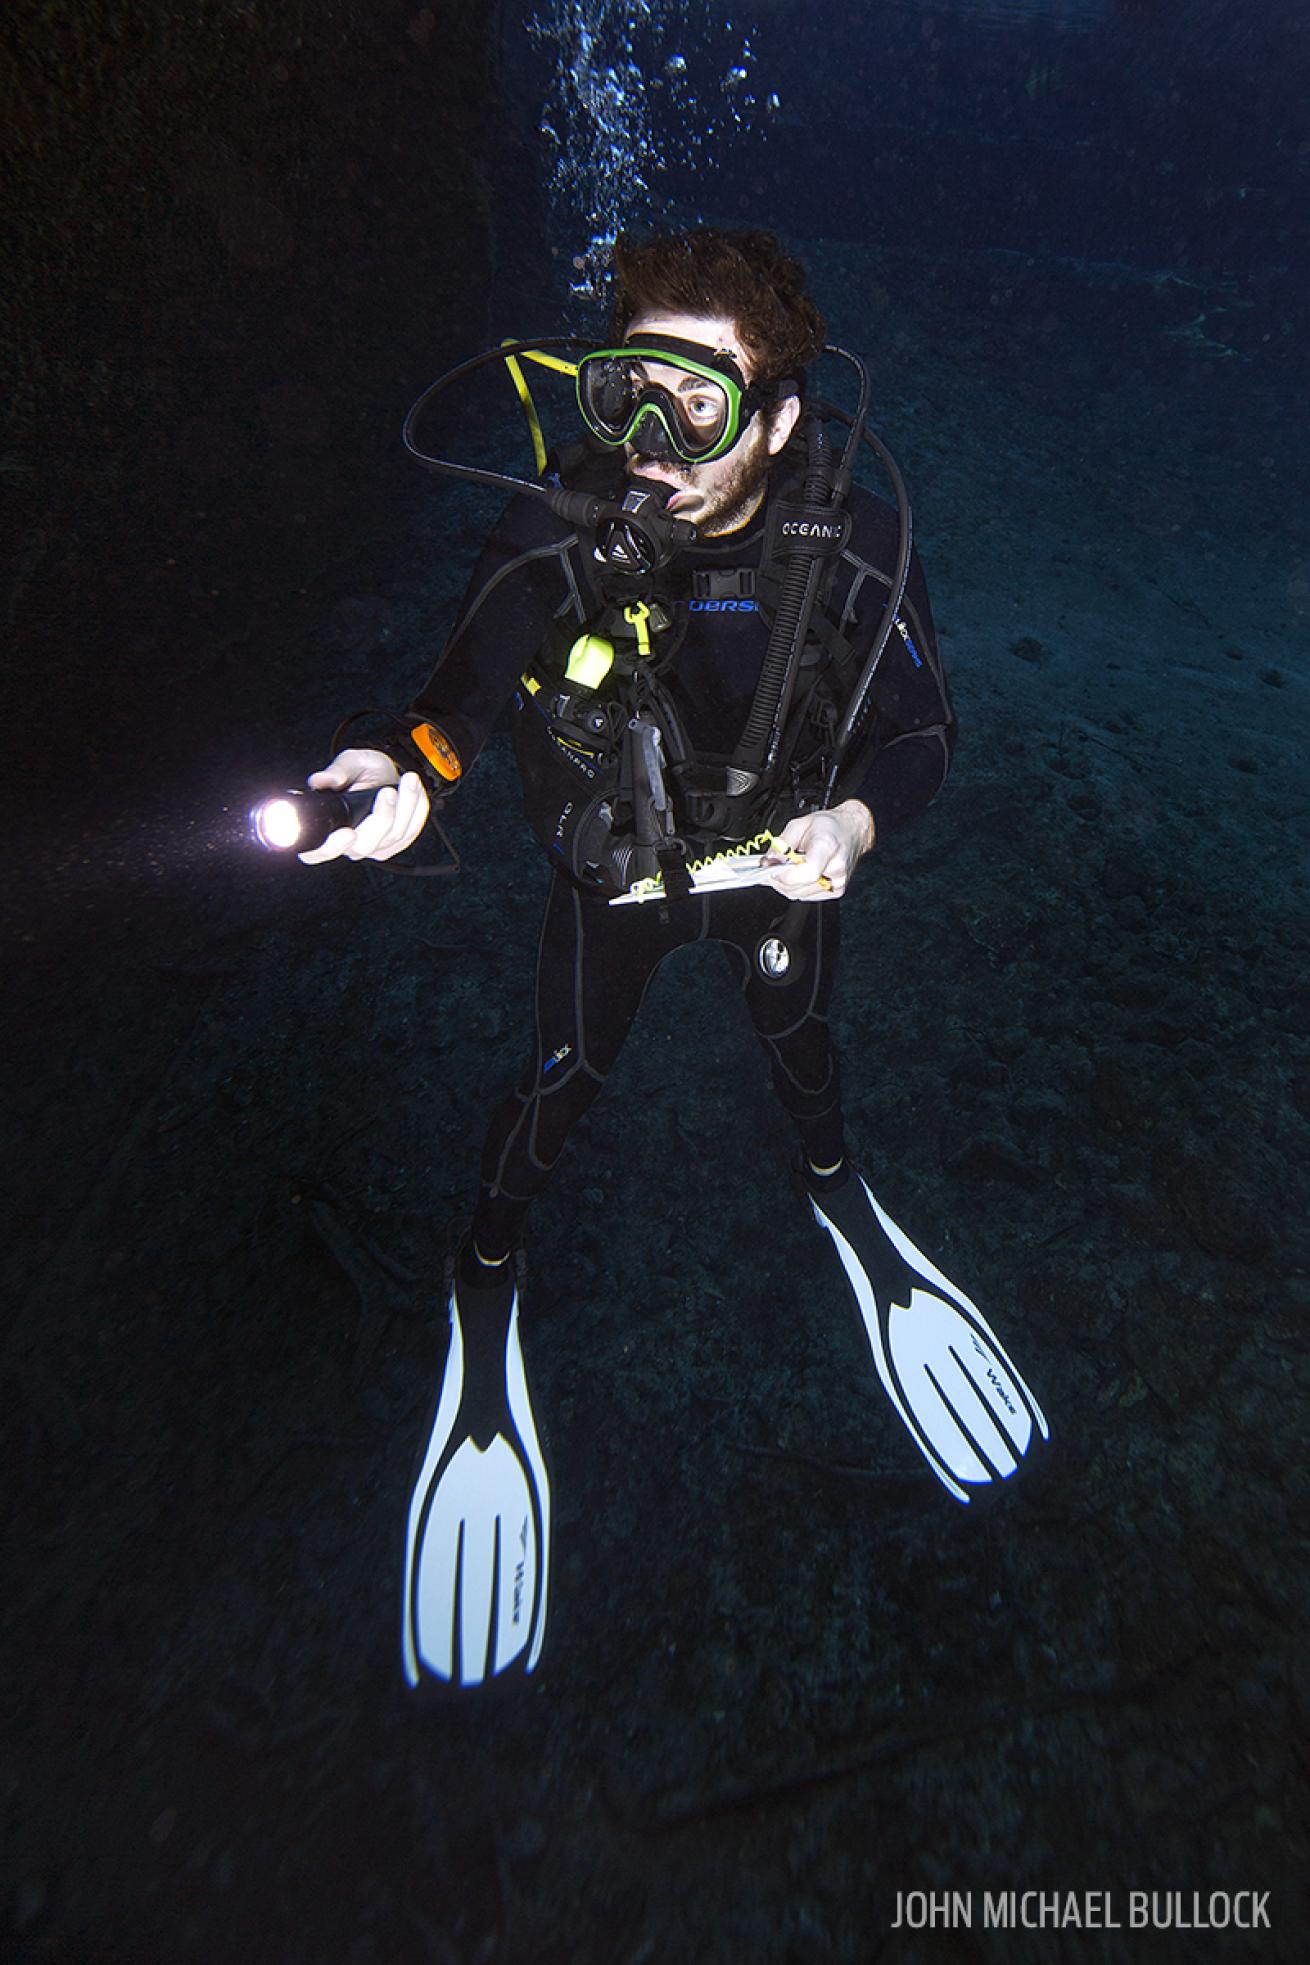 Scuba Diver Underwater with Dive Light in Florida